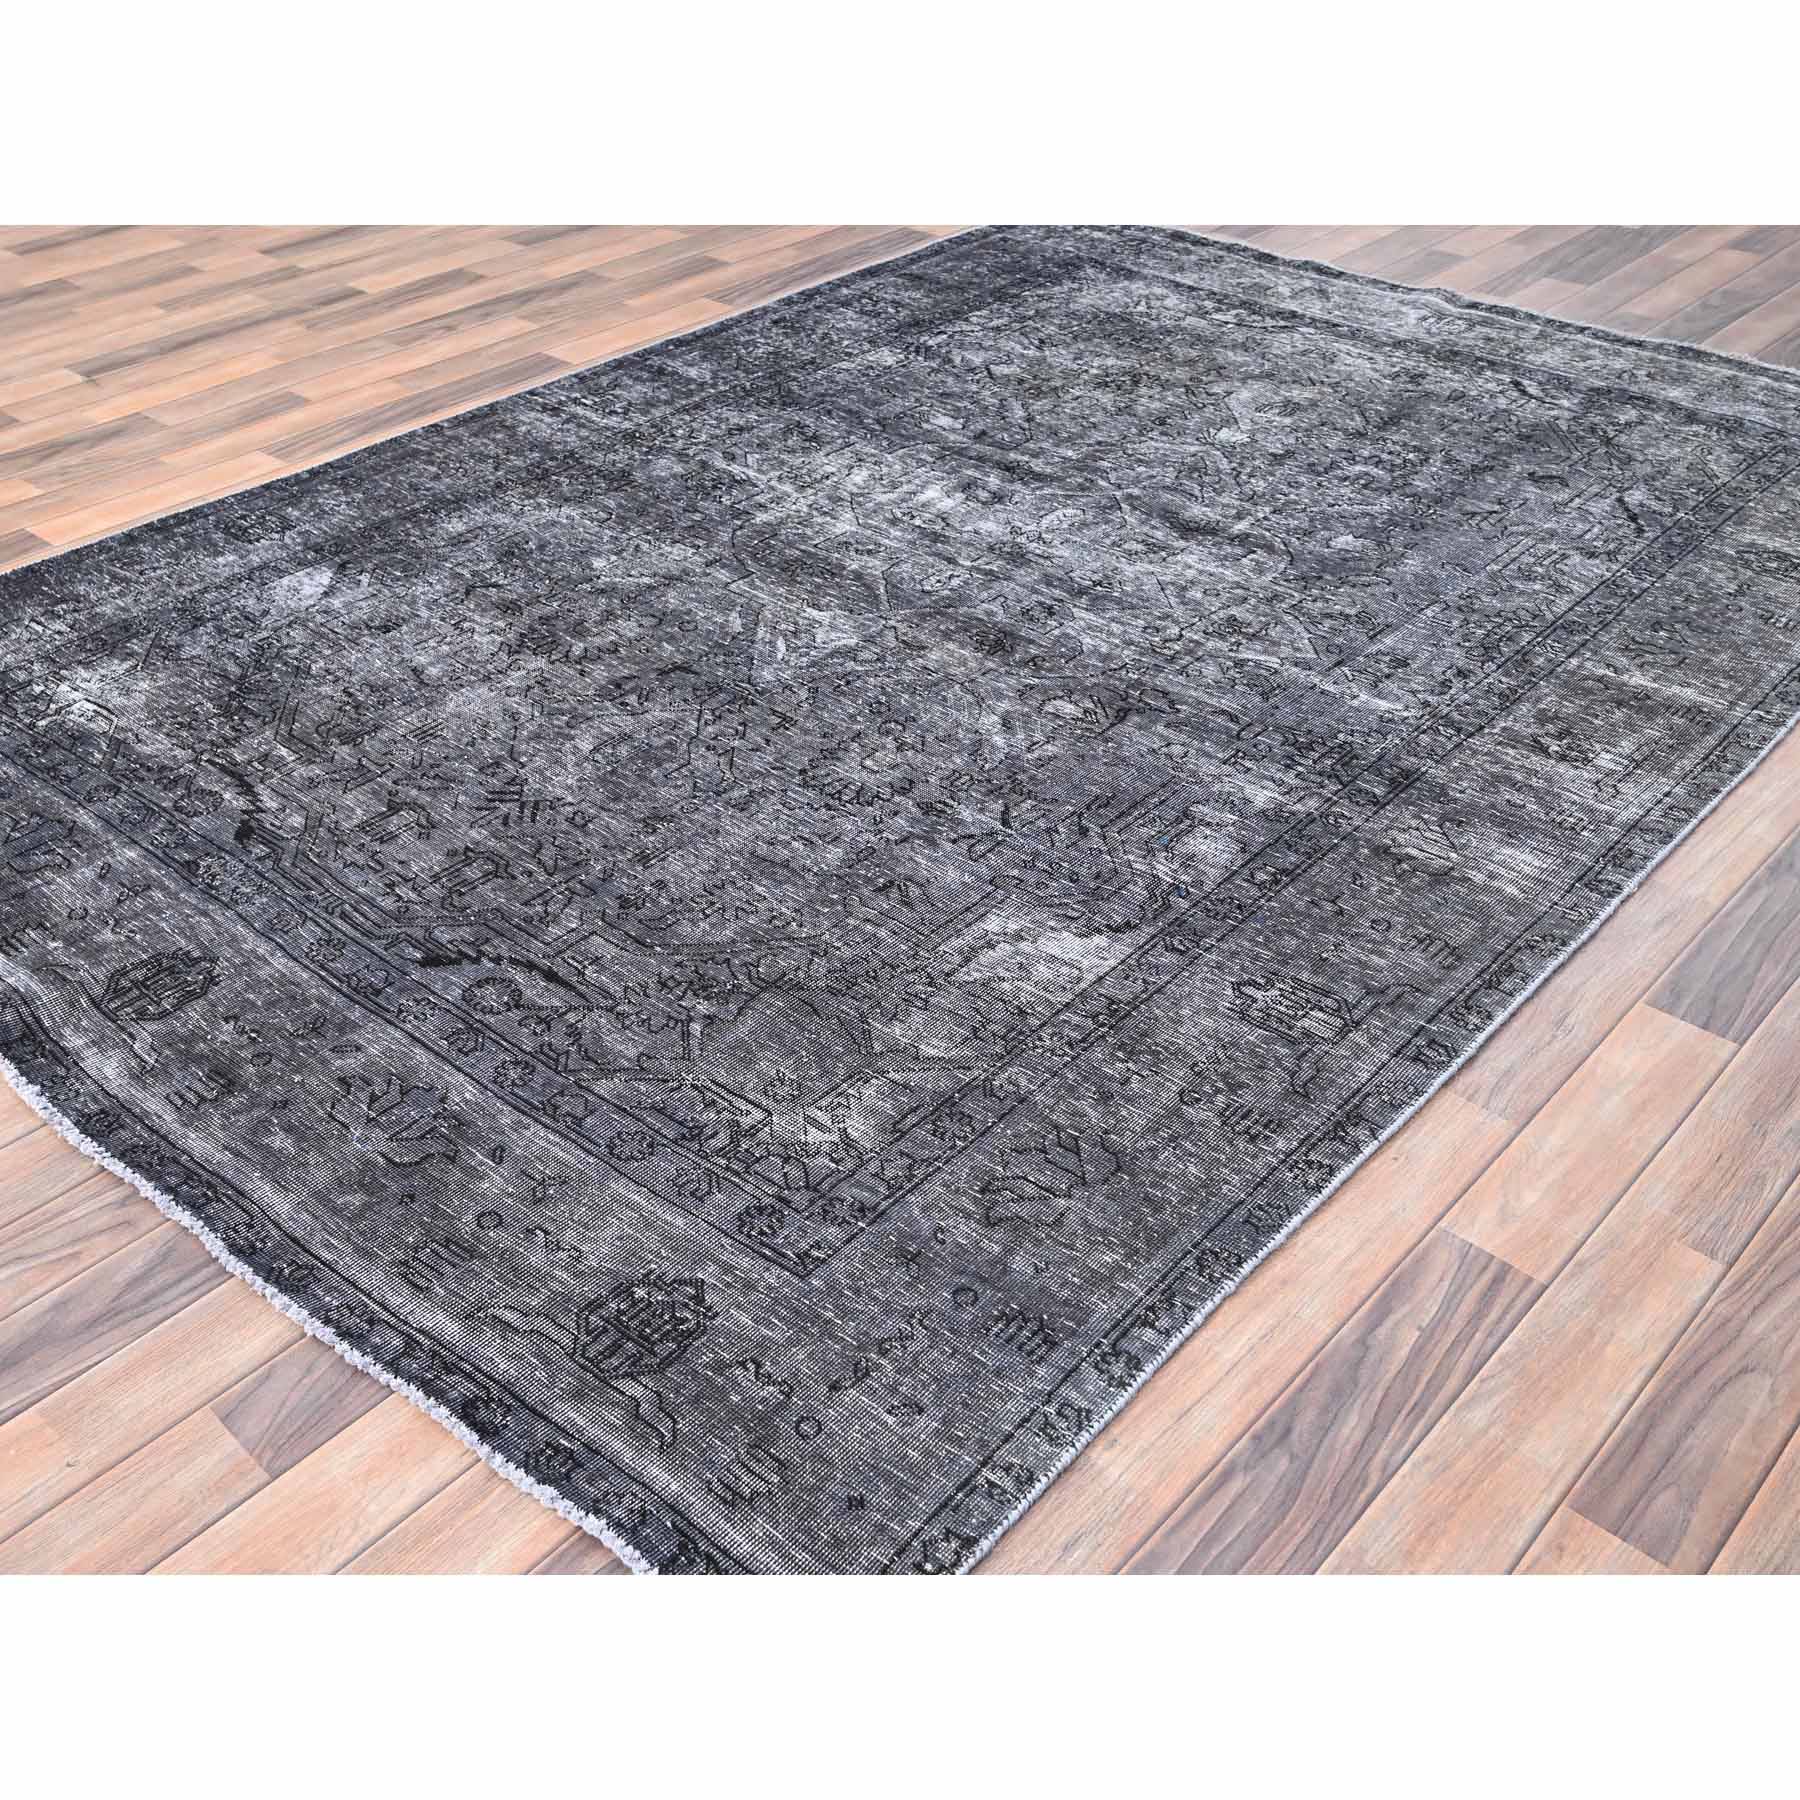 Overdyed-Vintage-Hand-Knotted-Rug-426995